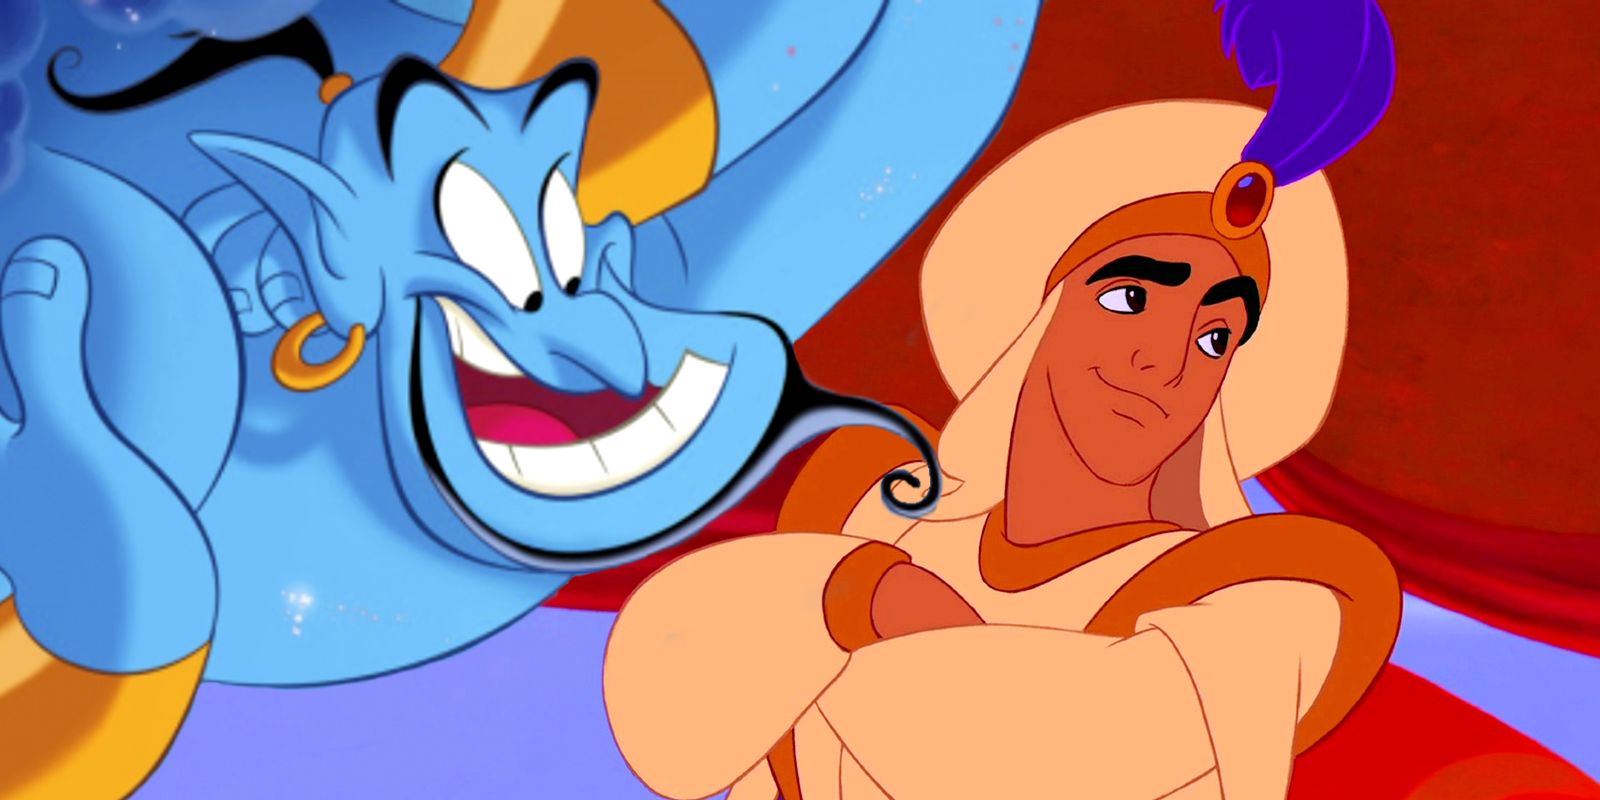 Aladdin: The Entire Movie Is Just His First Wish - Disney Theory Explained